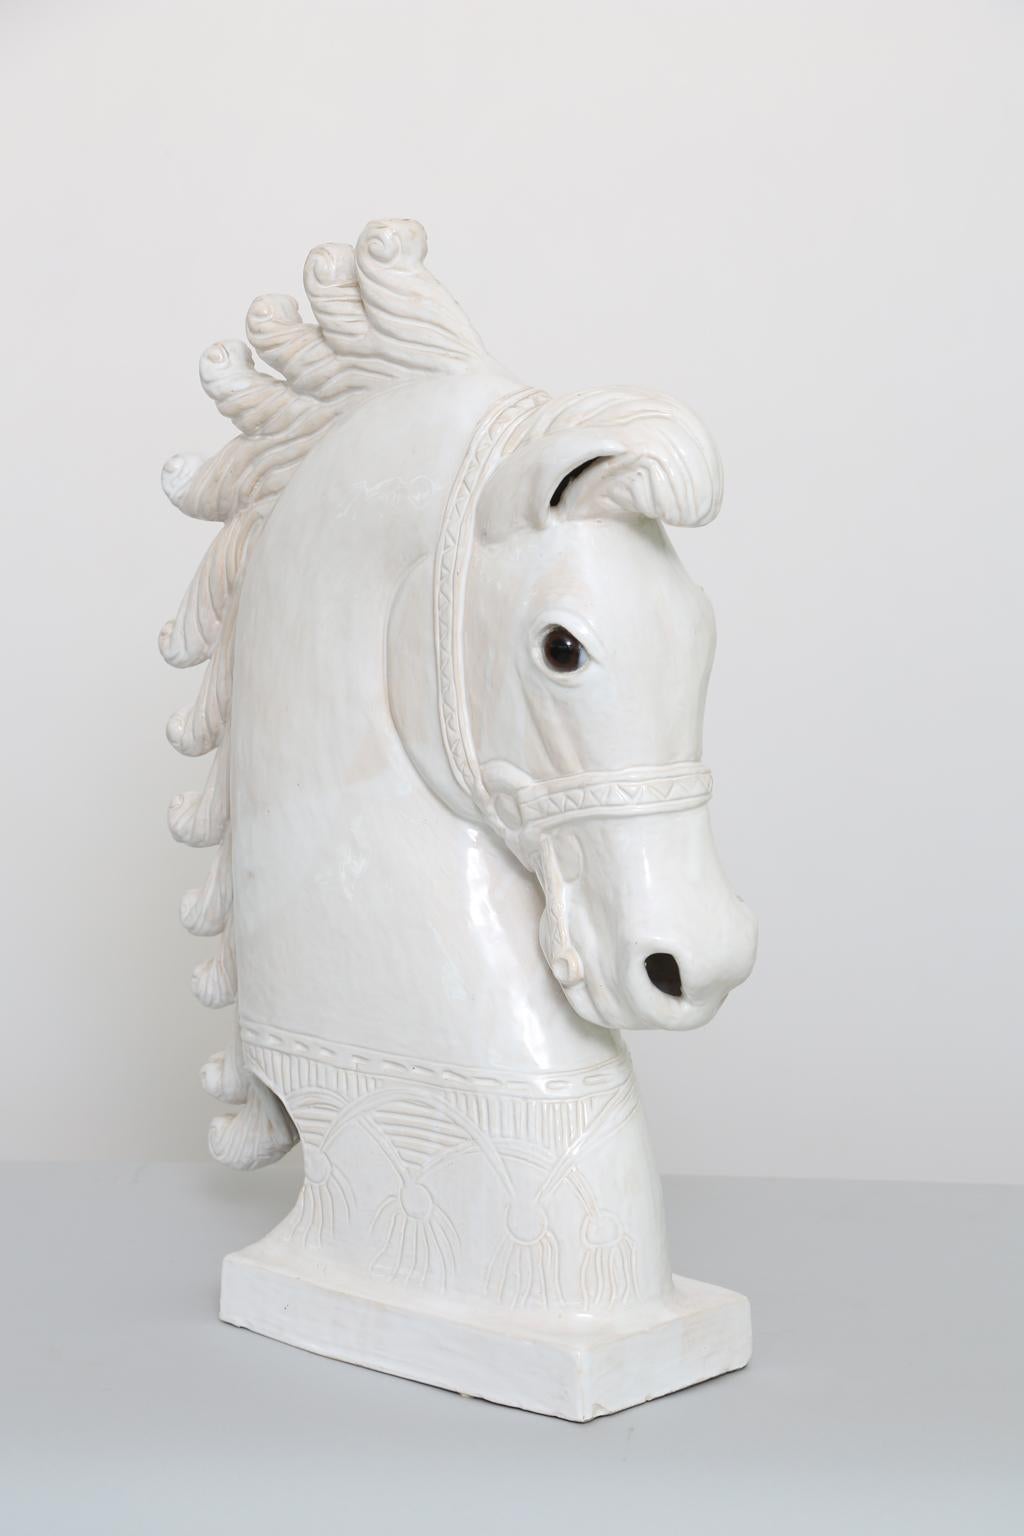 Horse head sculpture, with midcentury, stylized details, and glass eyes. Possibly made as an incense burner due to the chimney hole at the top of its mane. 

Stock ID: D2758.